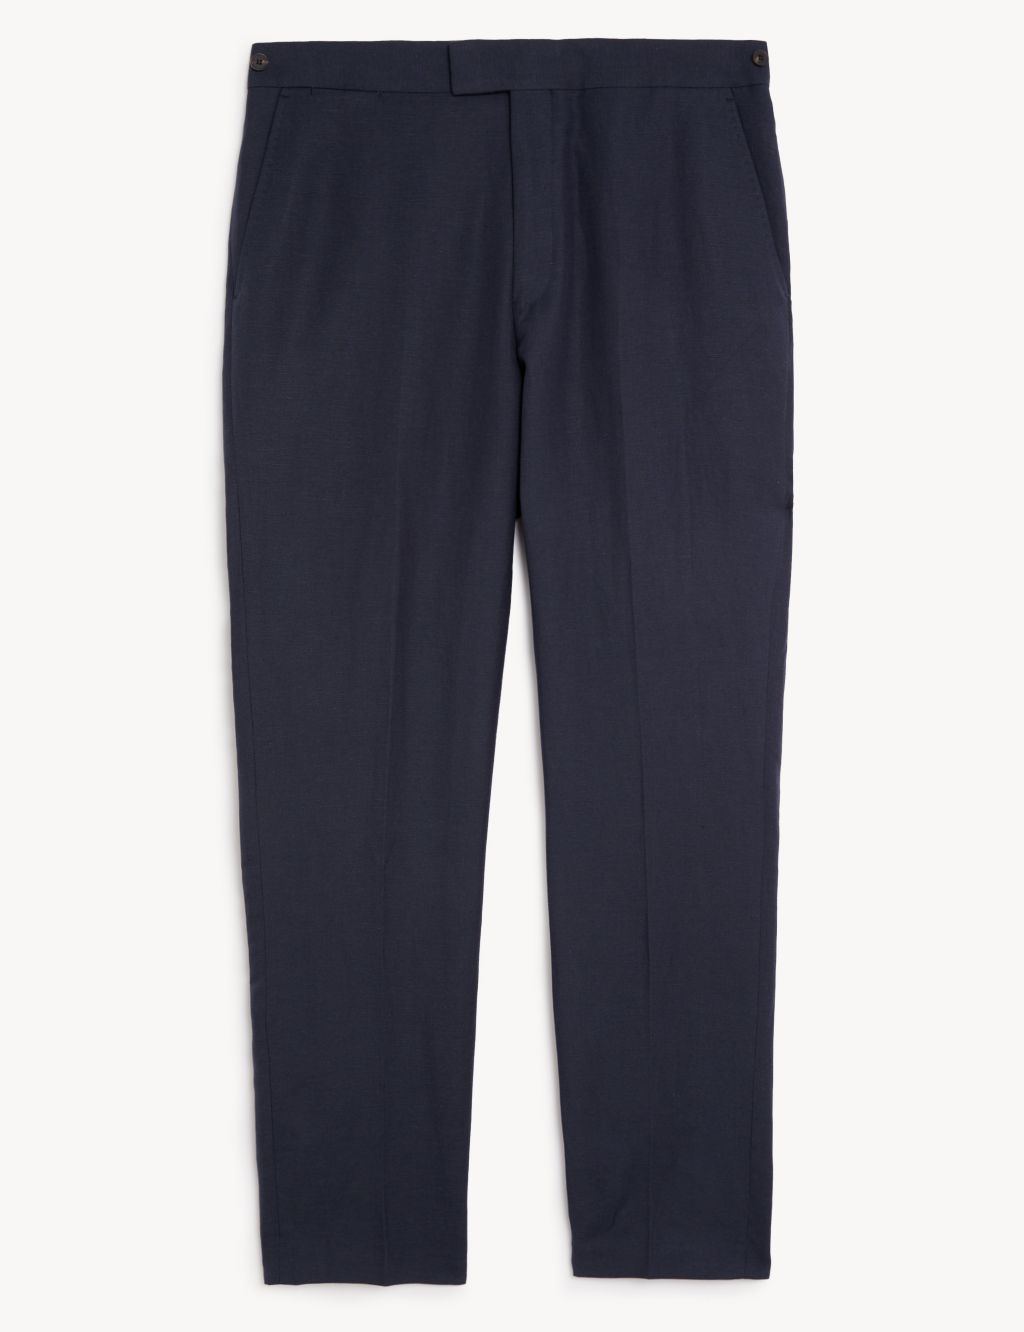 Tailored Fit Italian Silk And Linen Trousers image 2